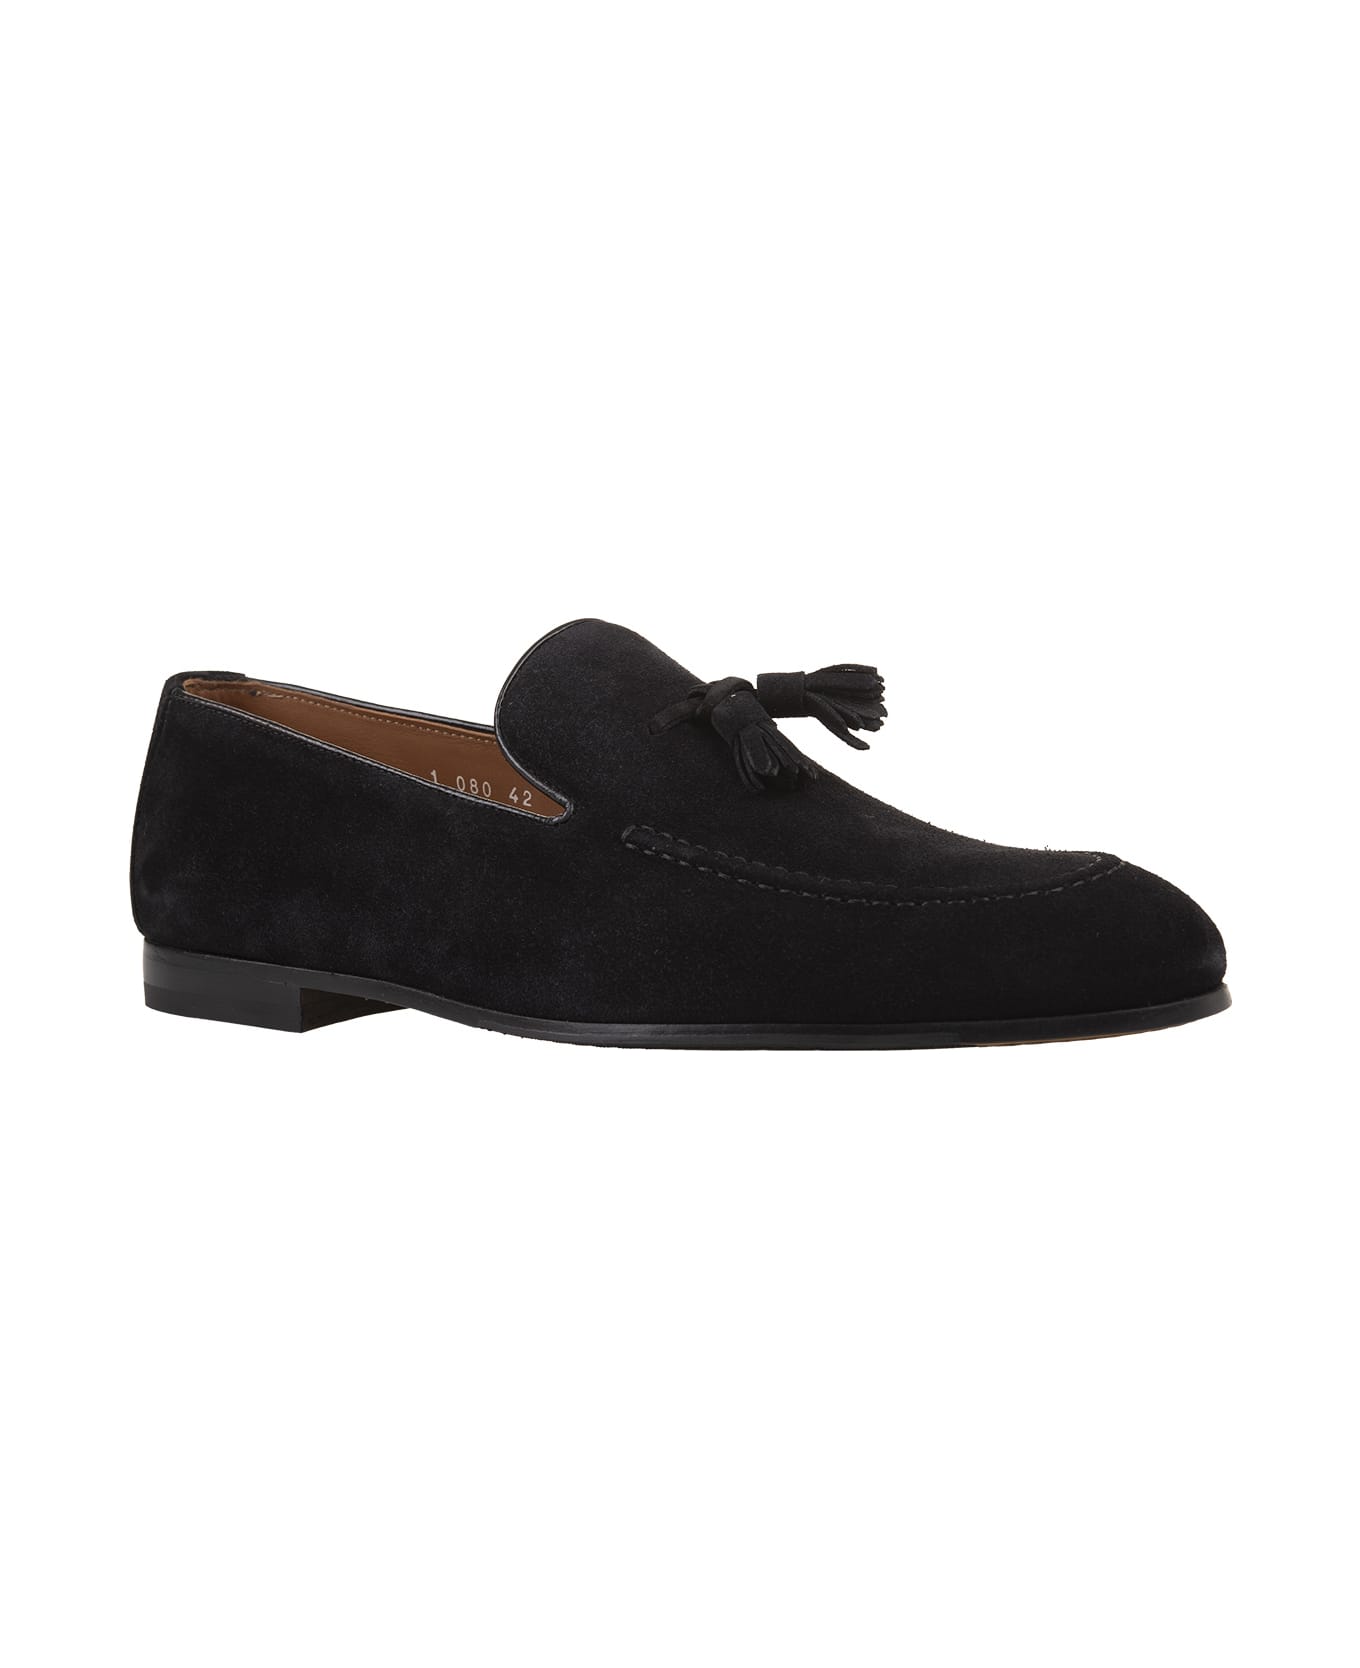 Doucal's Black Suede Loafers With Tassels - Black ローファー＆デッキシューズ